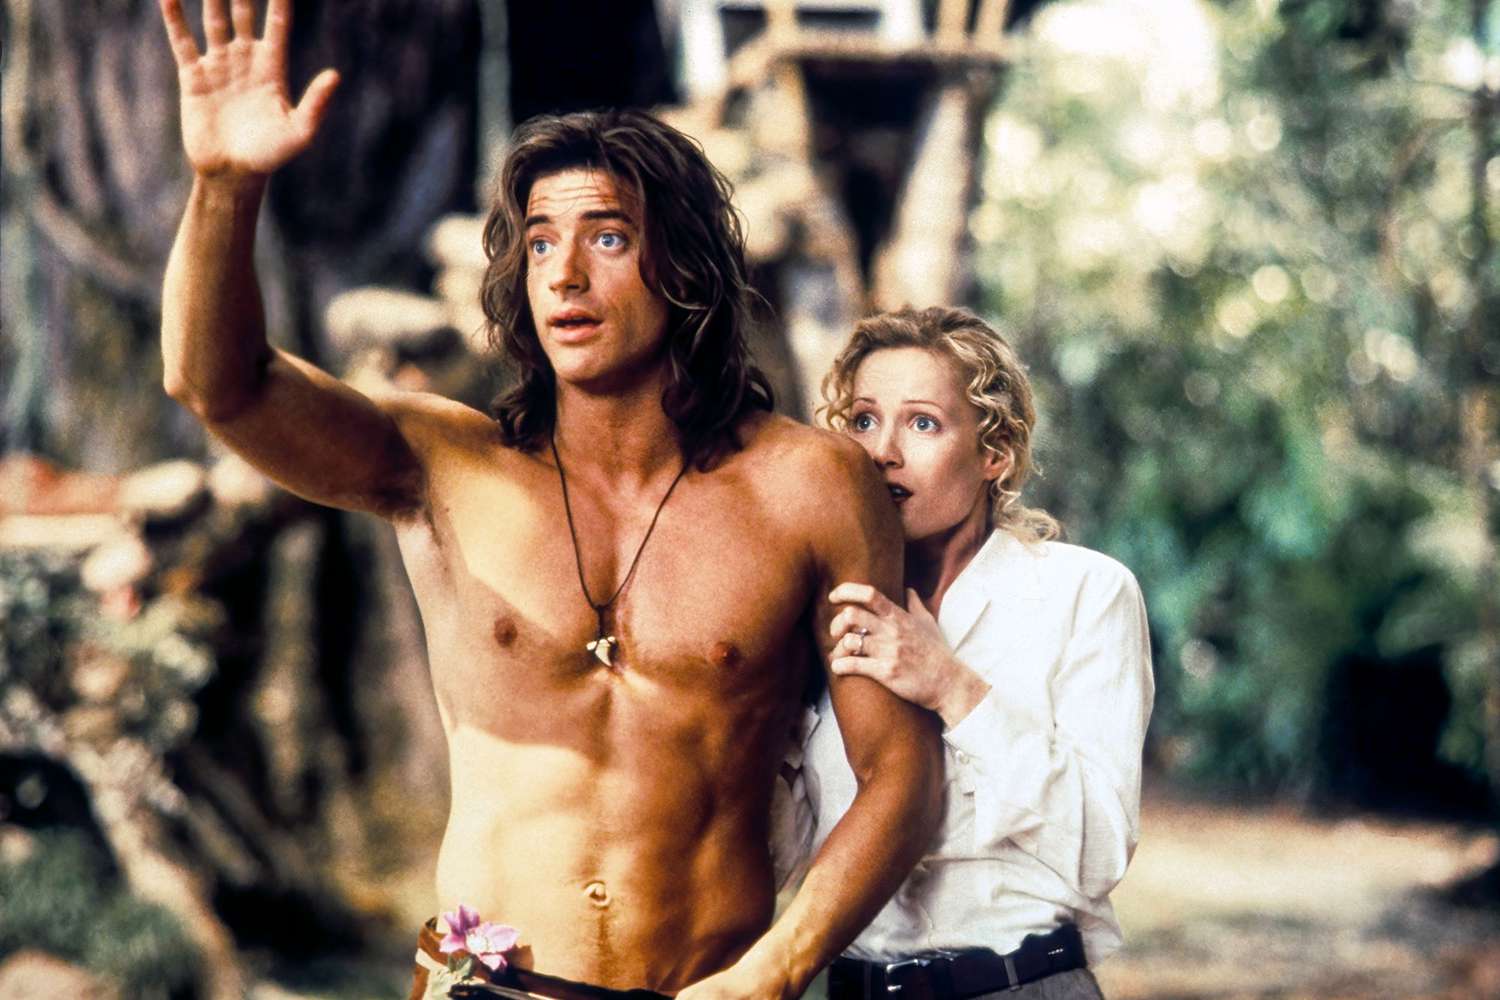 Brendan Fraser and Leslie Mann in 'George of the Jungle'